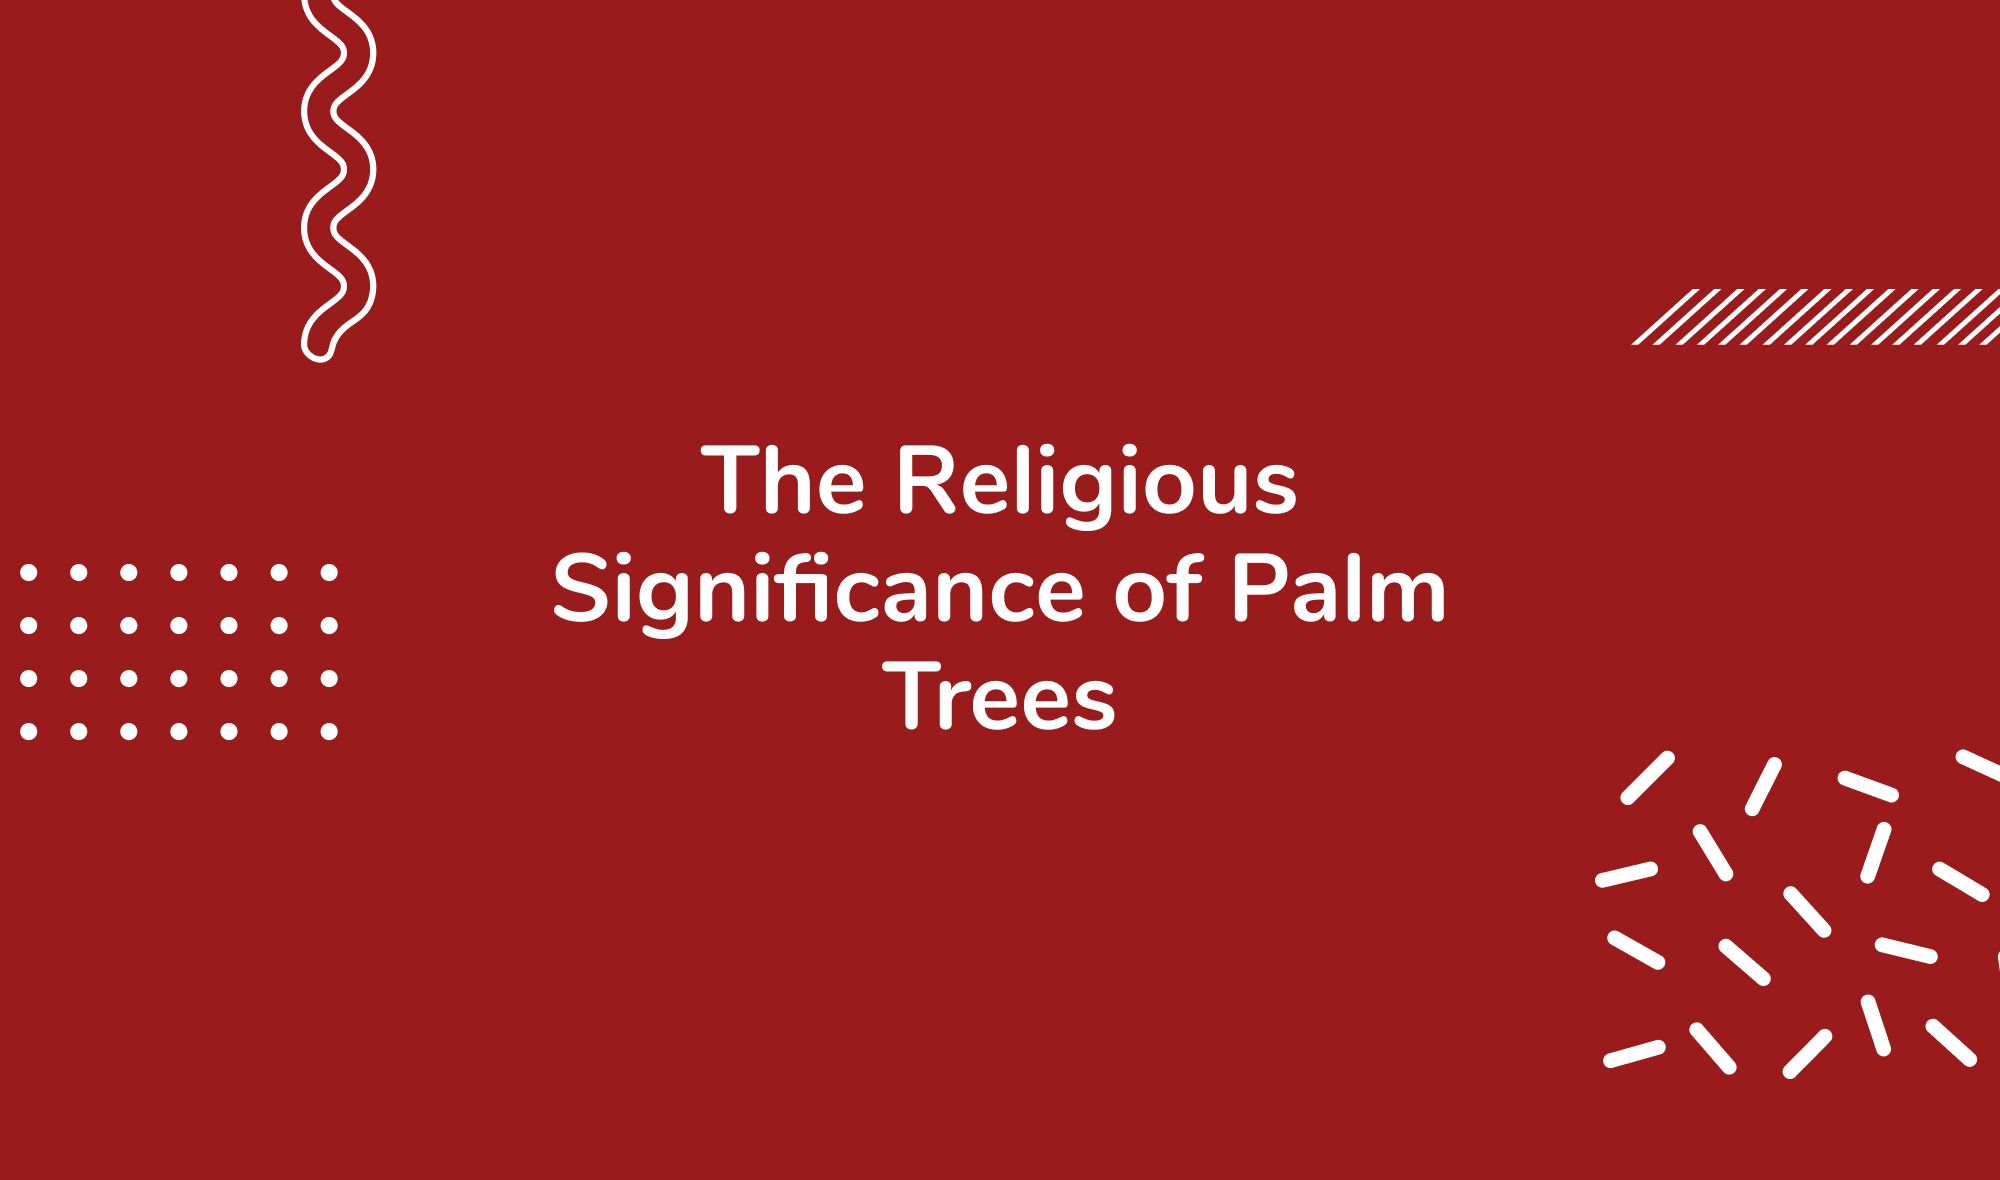 The Religious Significance of Palm Trees